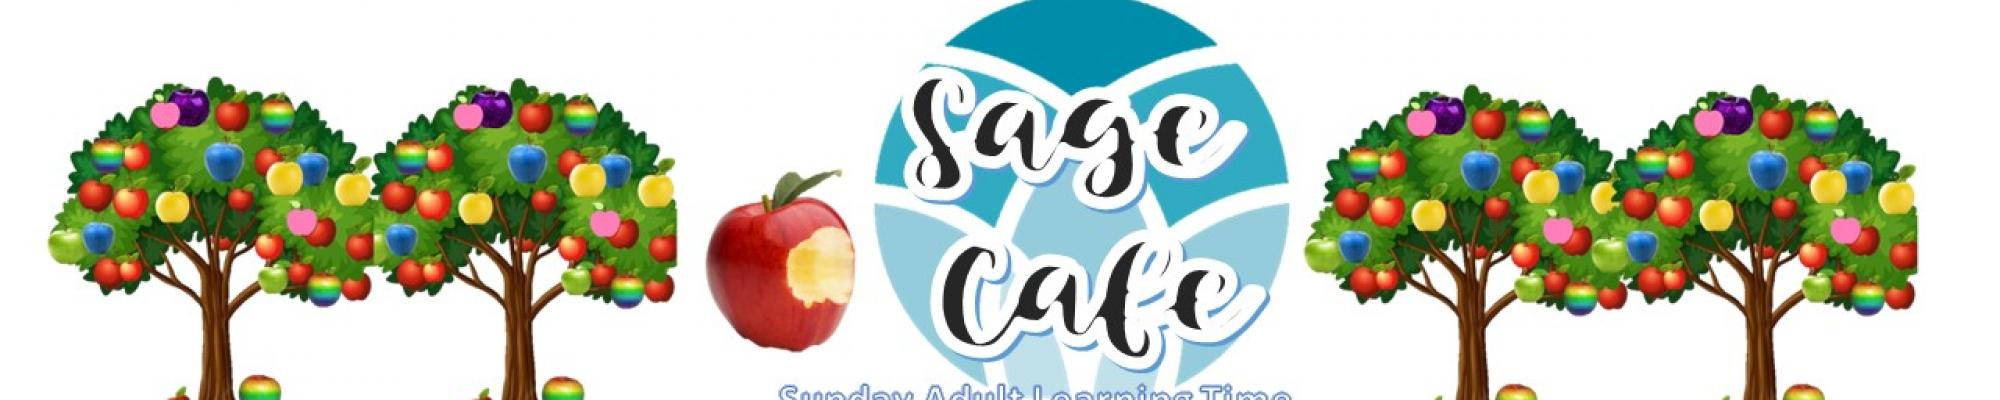 Sage Cafe and education trees